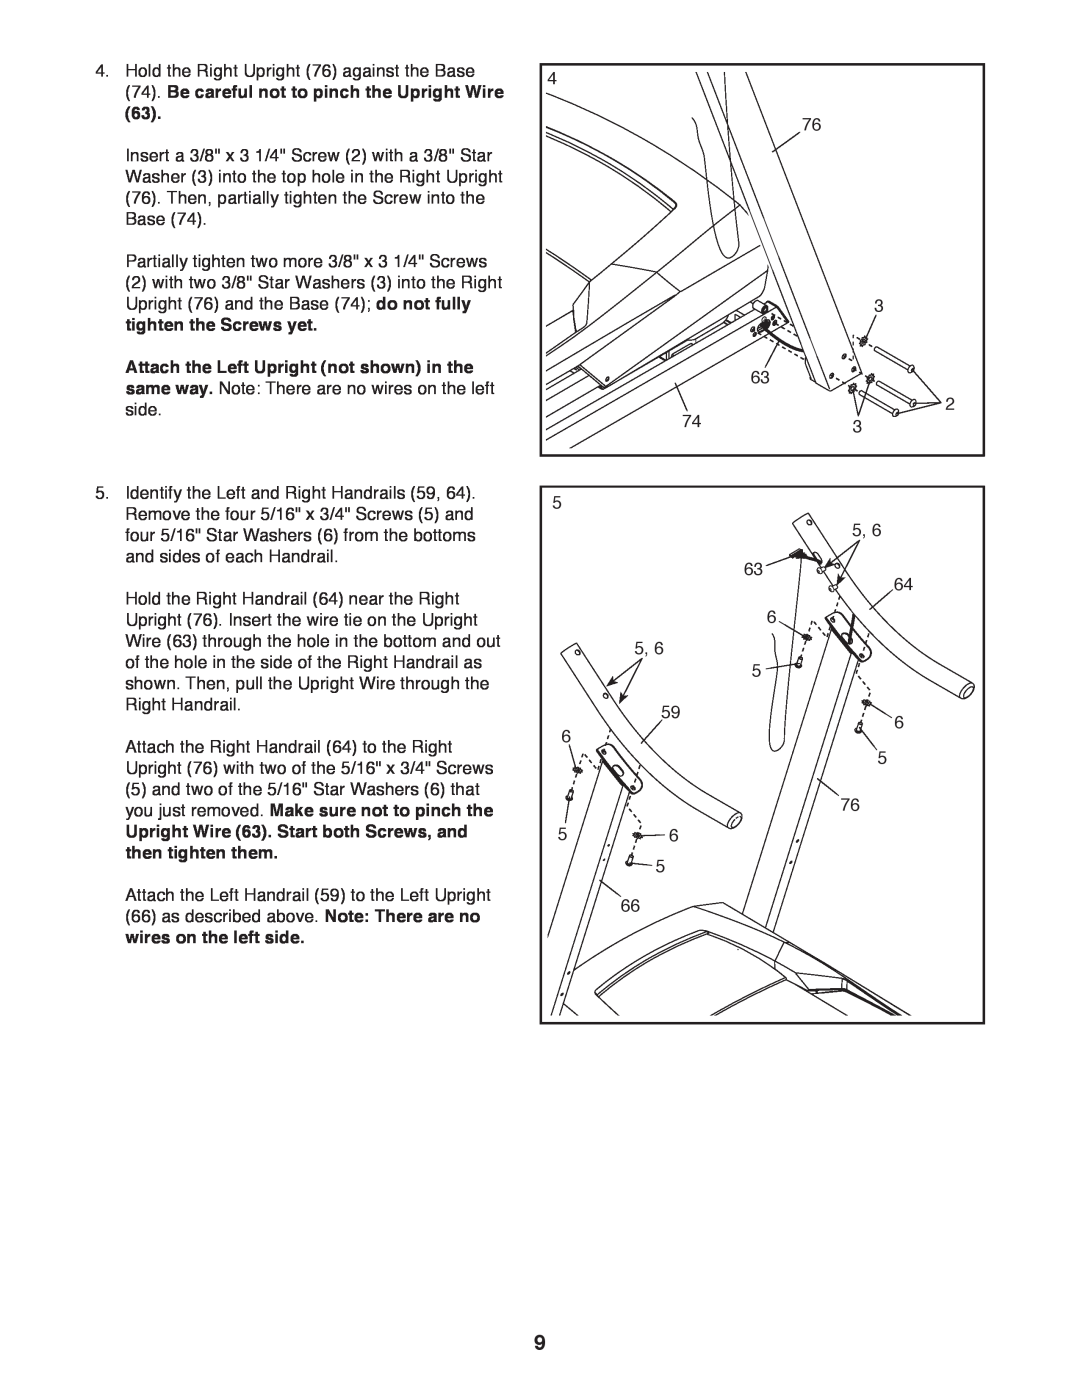 Weslo WLTL39312.0 user manual Be careful not to pinch the Upright Wire, tighten the Screws yet, then tighten them 